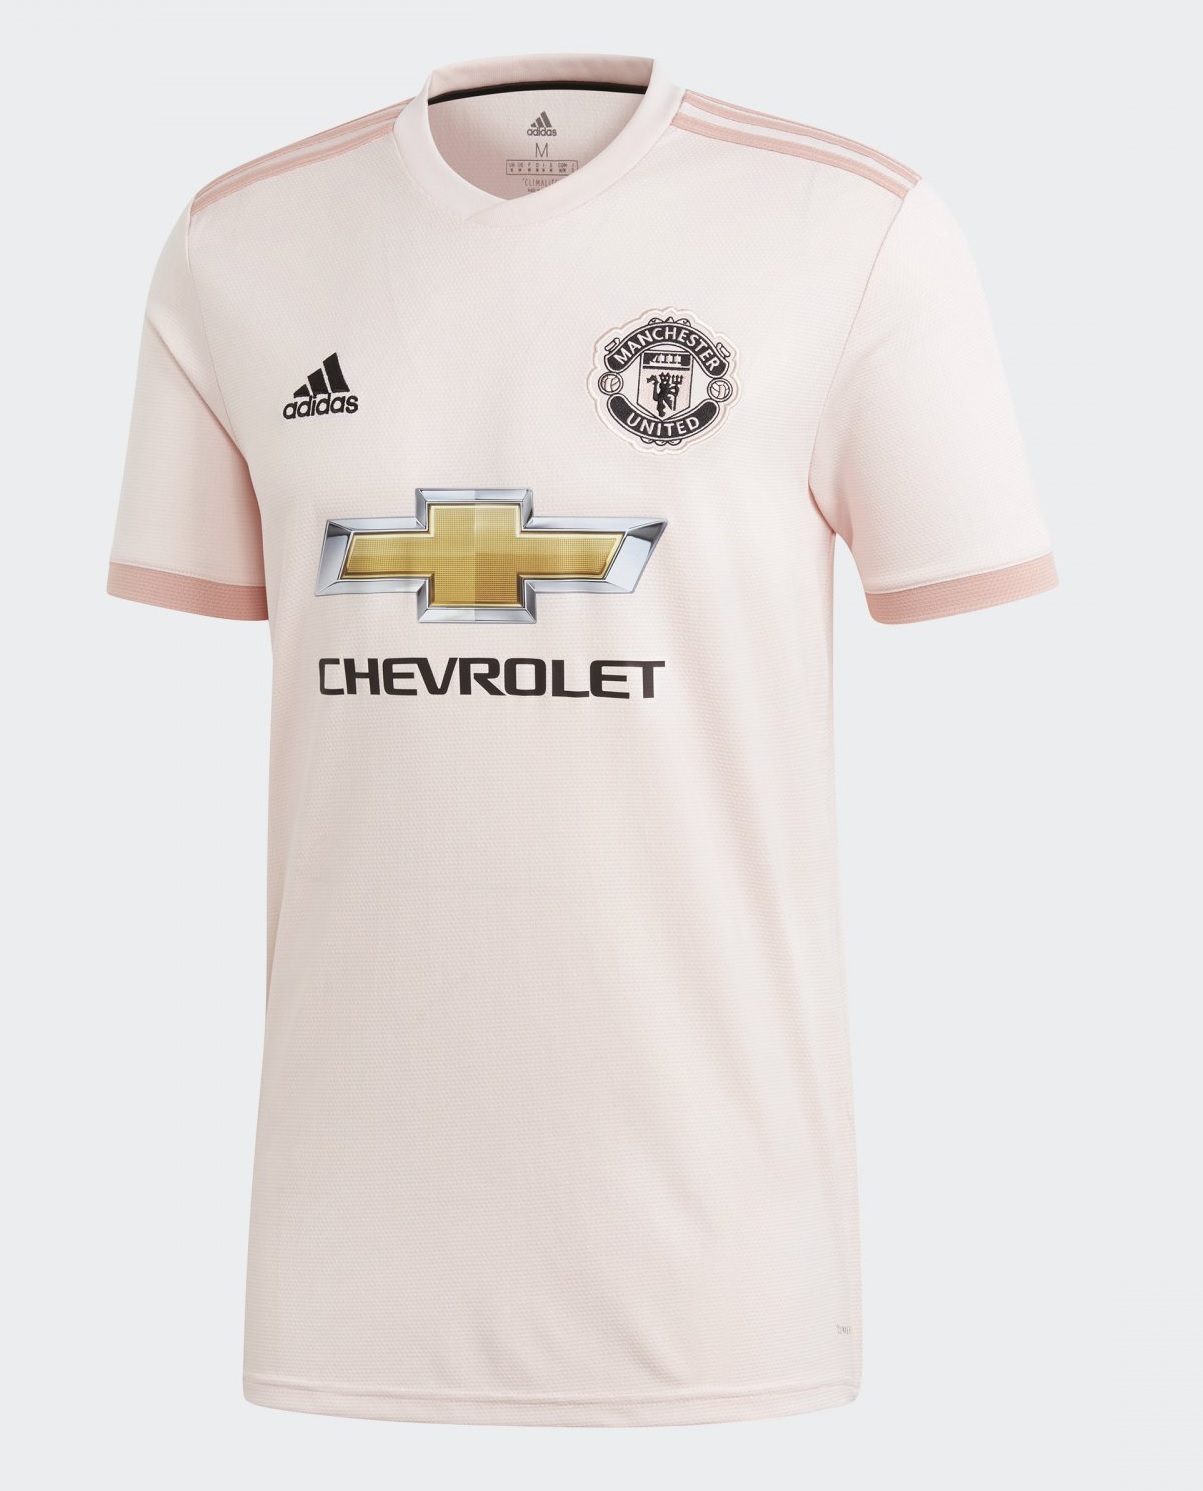 verticaal Labe industrie Manchester United uitshirt 2018 - Manchester United away kit 18/19 - MUFC